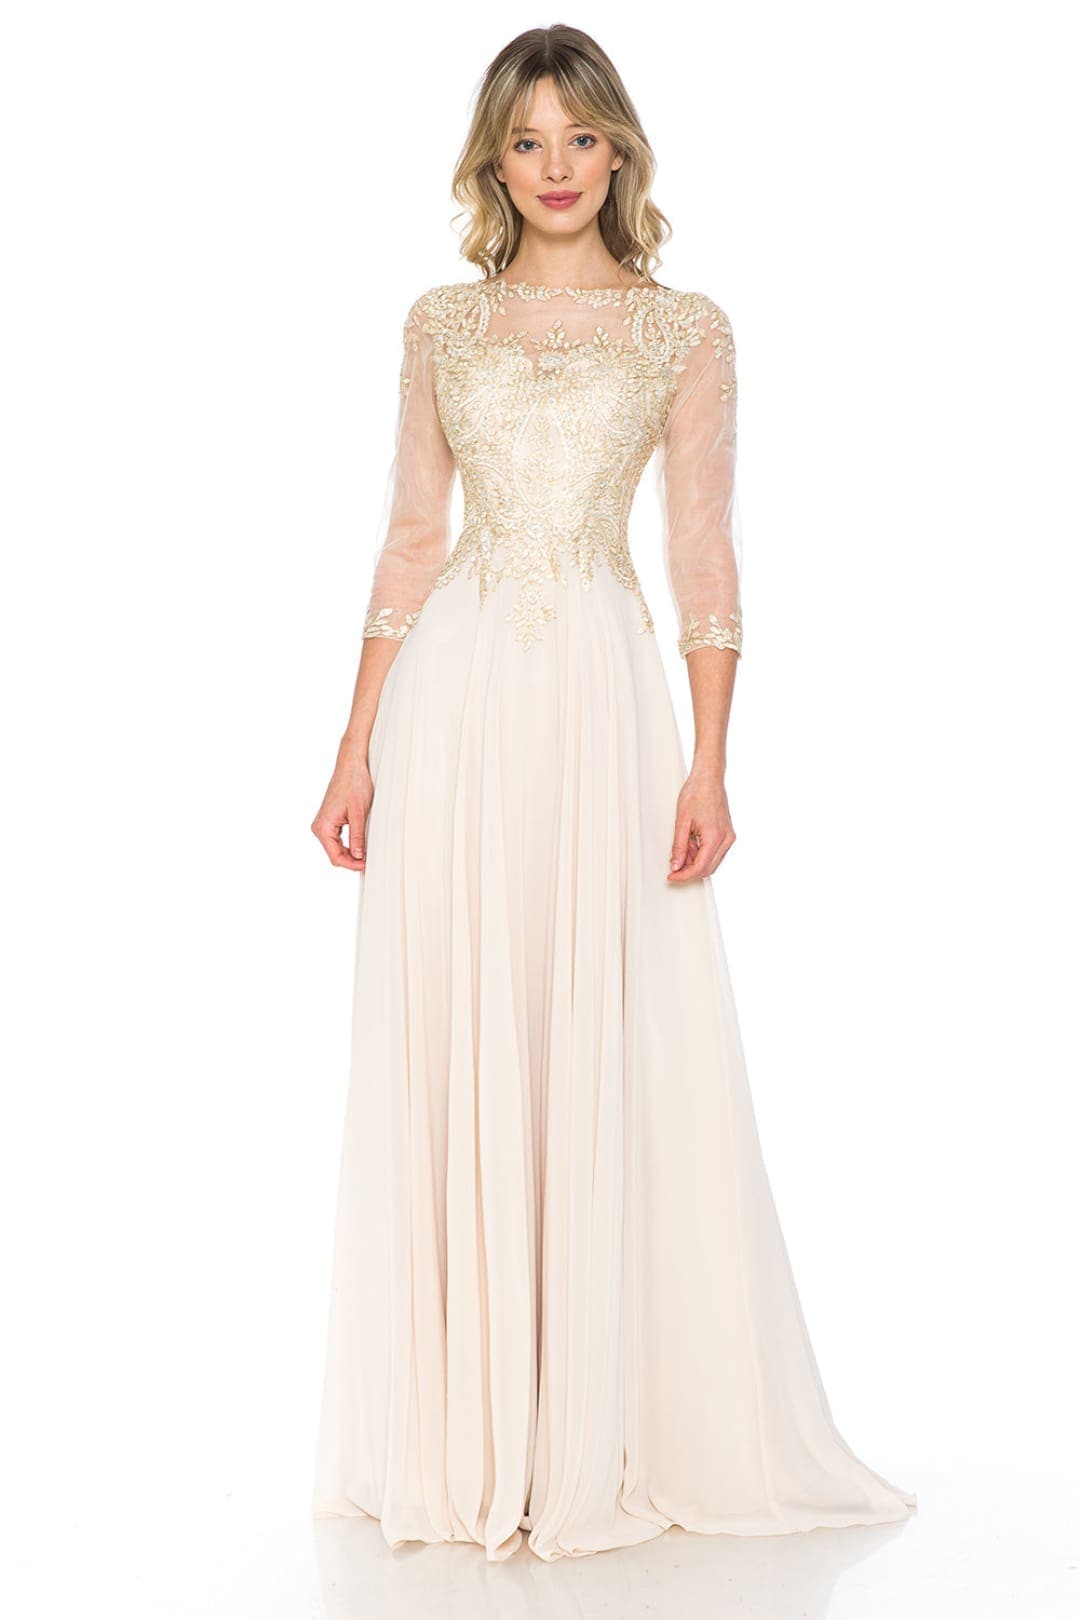 Plus Size Mother Of The Bride Dress - CHAMPAGNE / S